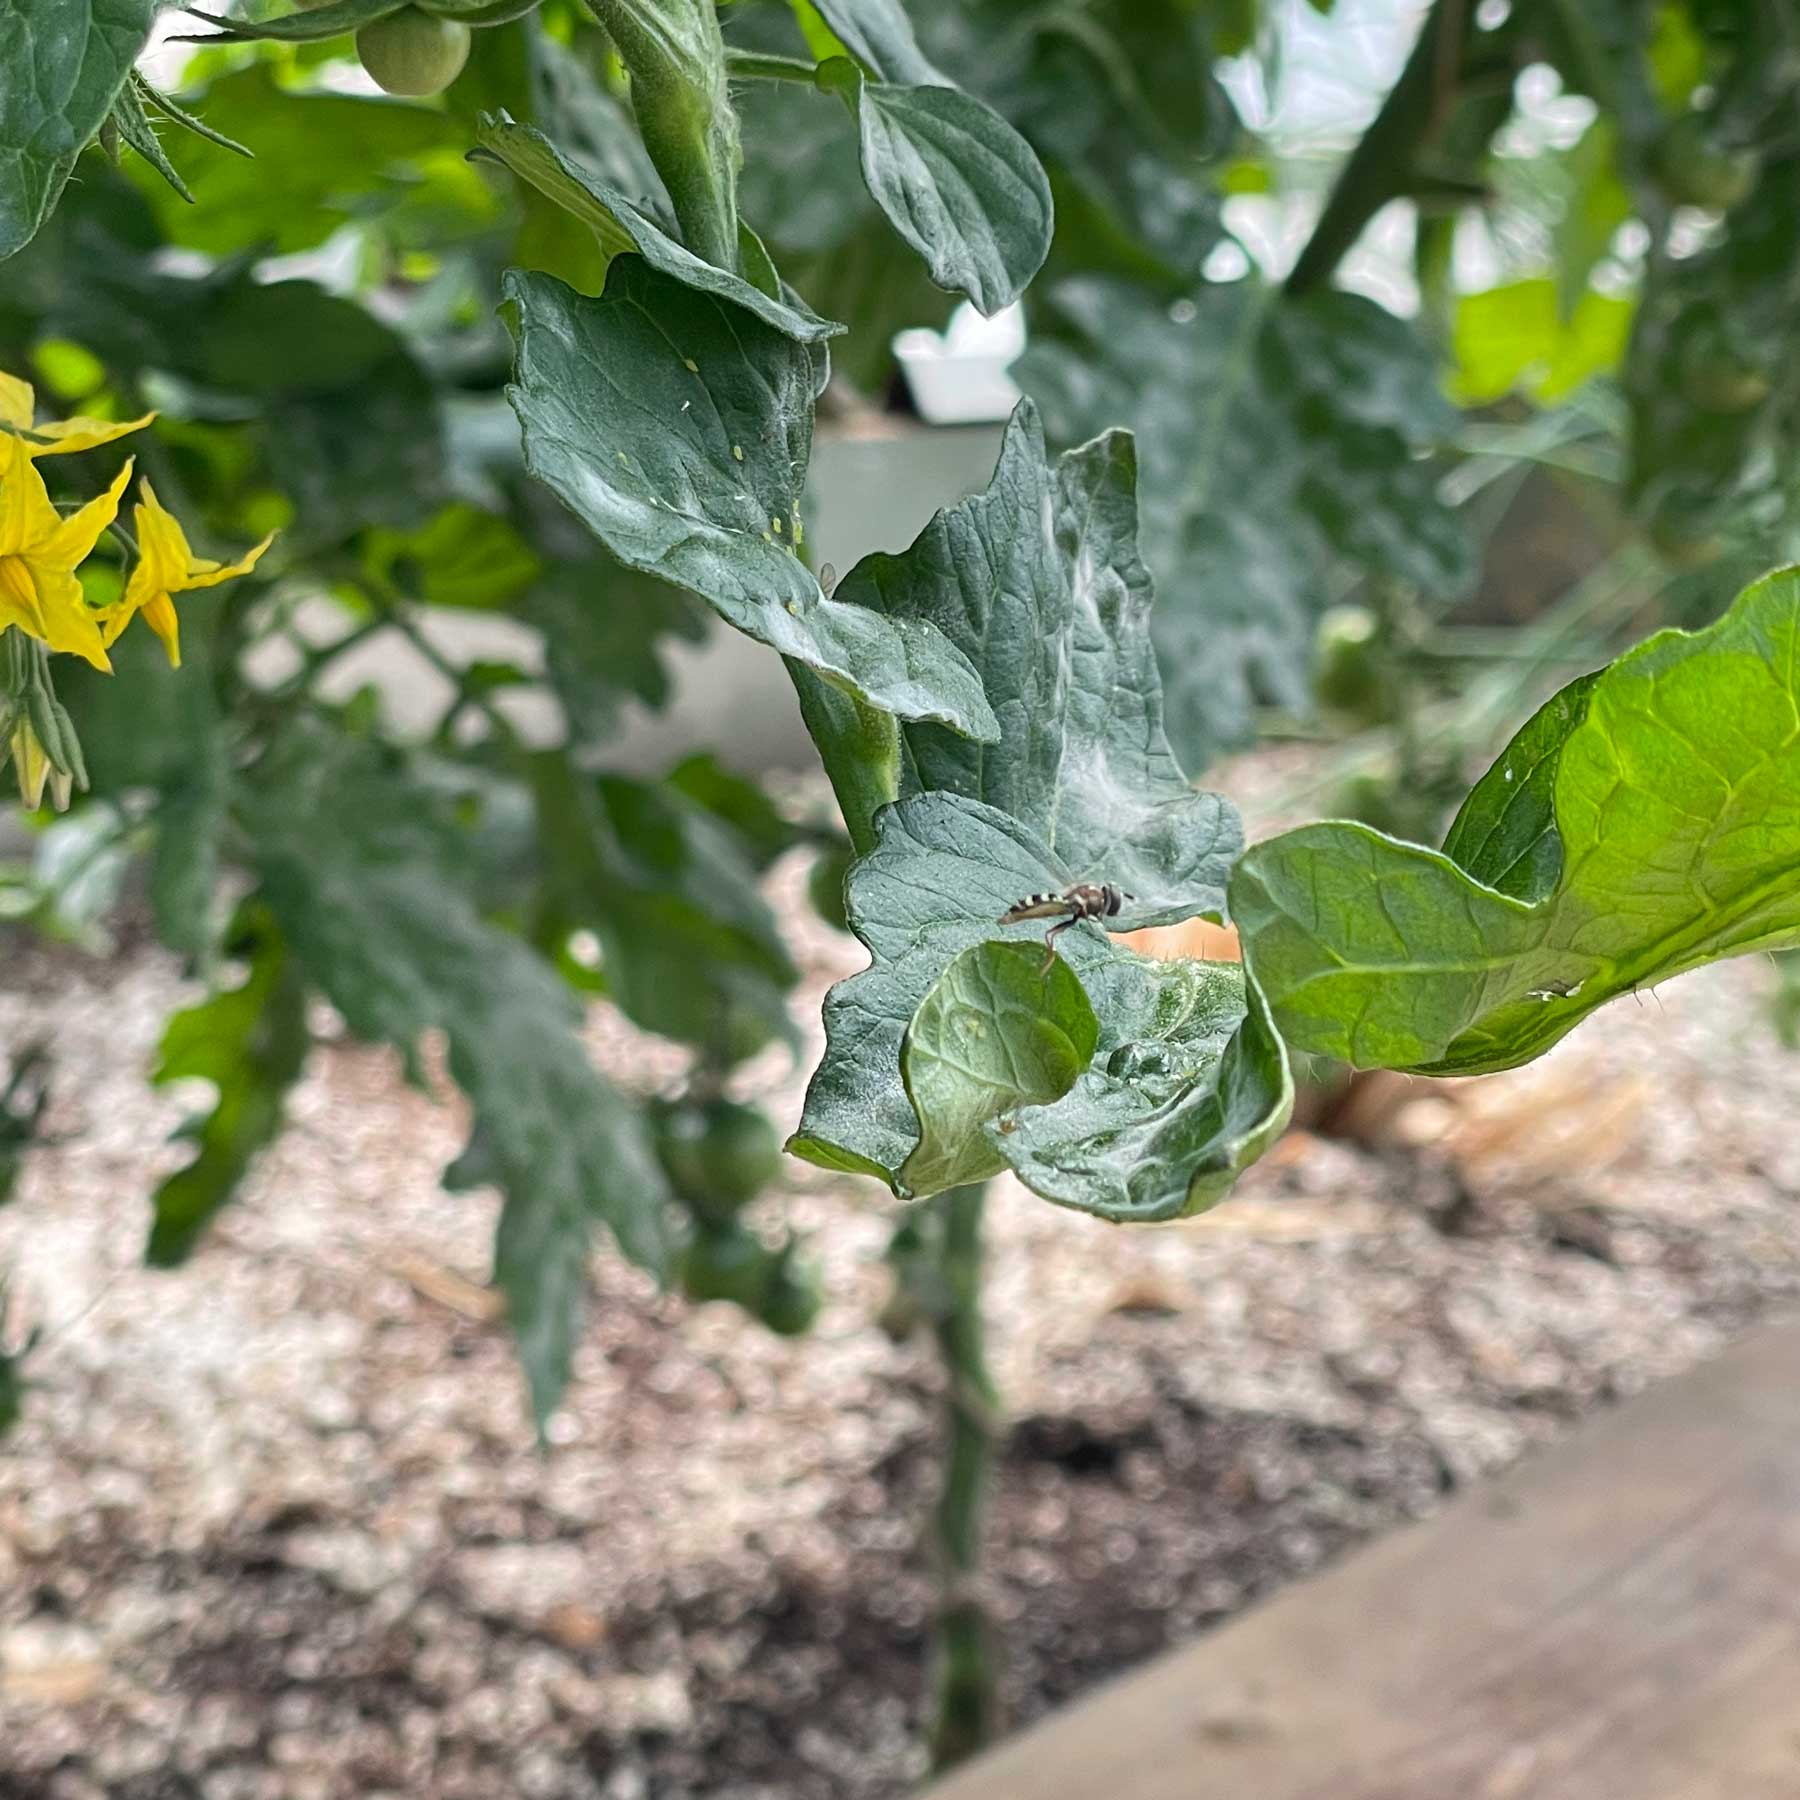 hoverfly hovering over a tomato leaf in a Growing Dome, you can see some of the yellow tomato blooms on the left and the raised bed cap in the foreground